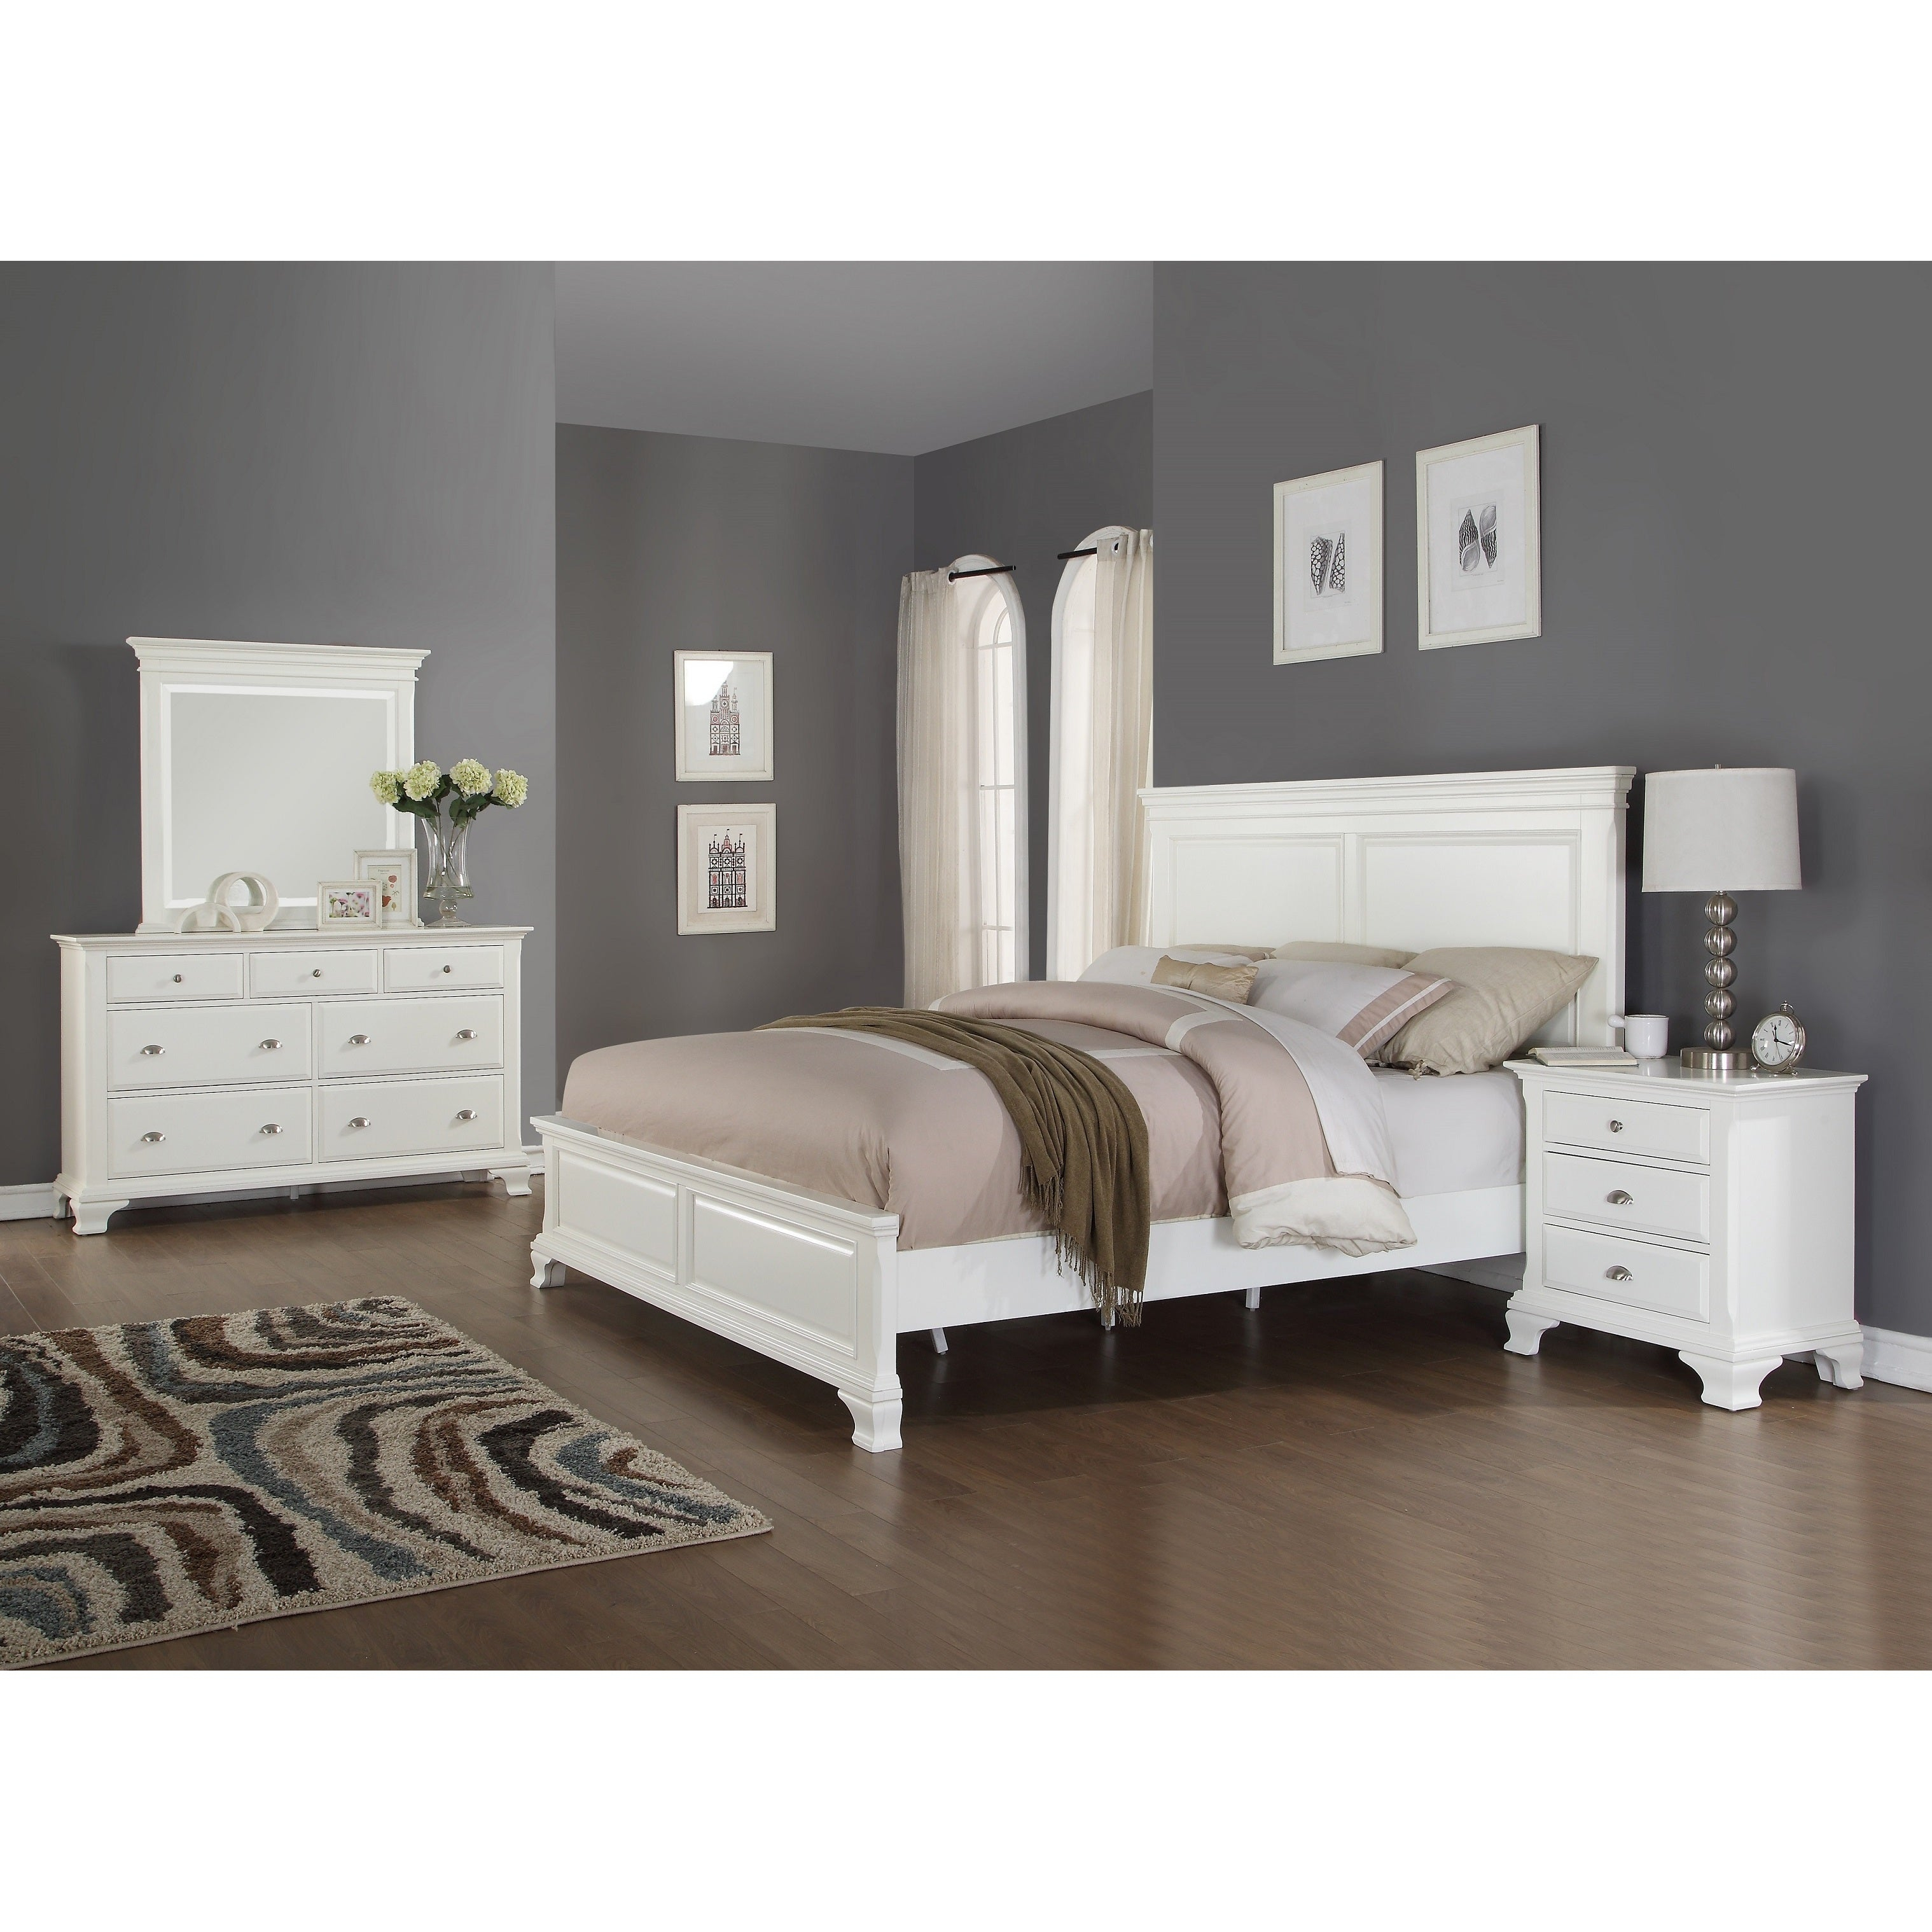 Laveno 012 White Wood Bedroom Furniture Set Includes Queen Bed Dresser Mirror And Night Stand inside measurements 3037 X 3037